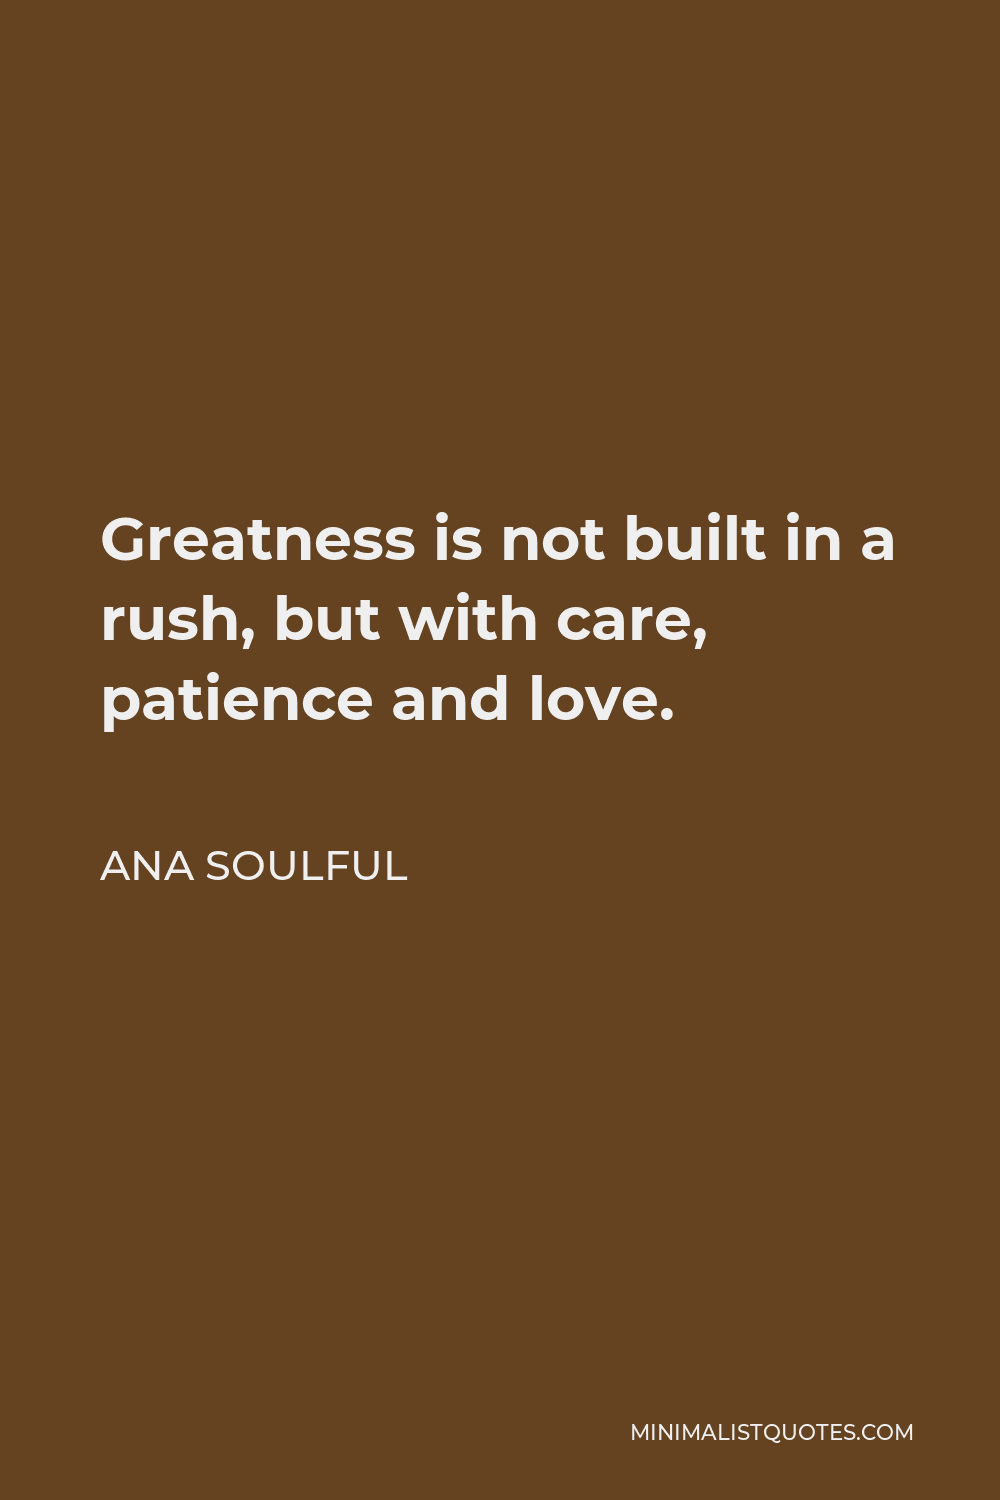 Ana Soulful Quote - Greatness is not built in a rush, but with care, patience and love.